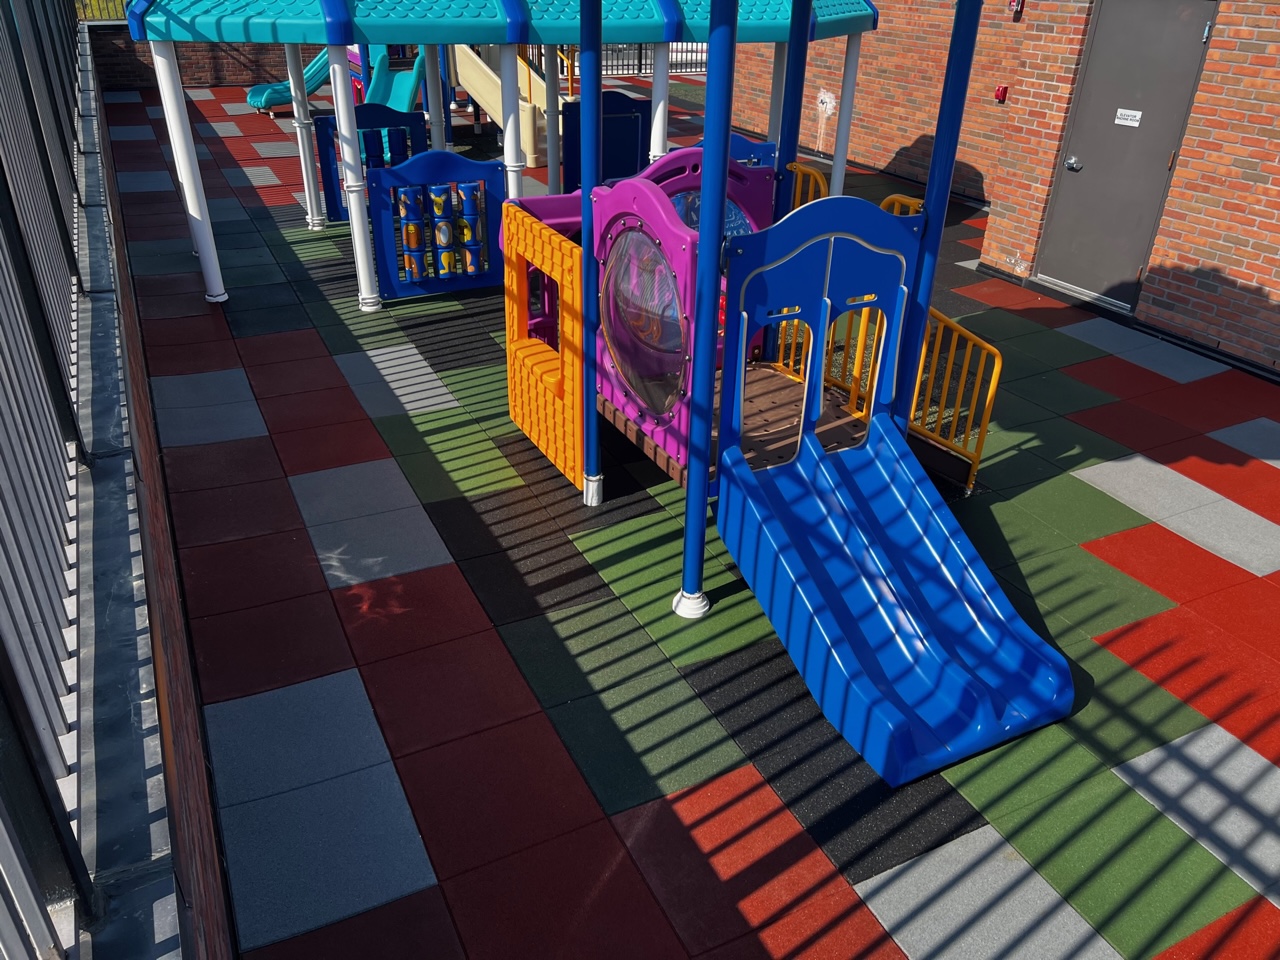 Charter School Rooftop Playground Using Bright Pigmented Colors